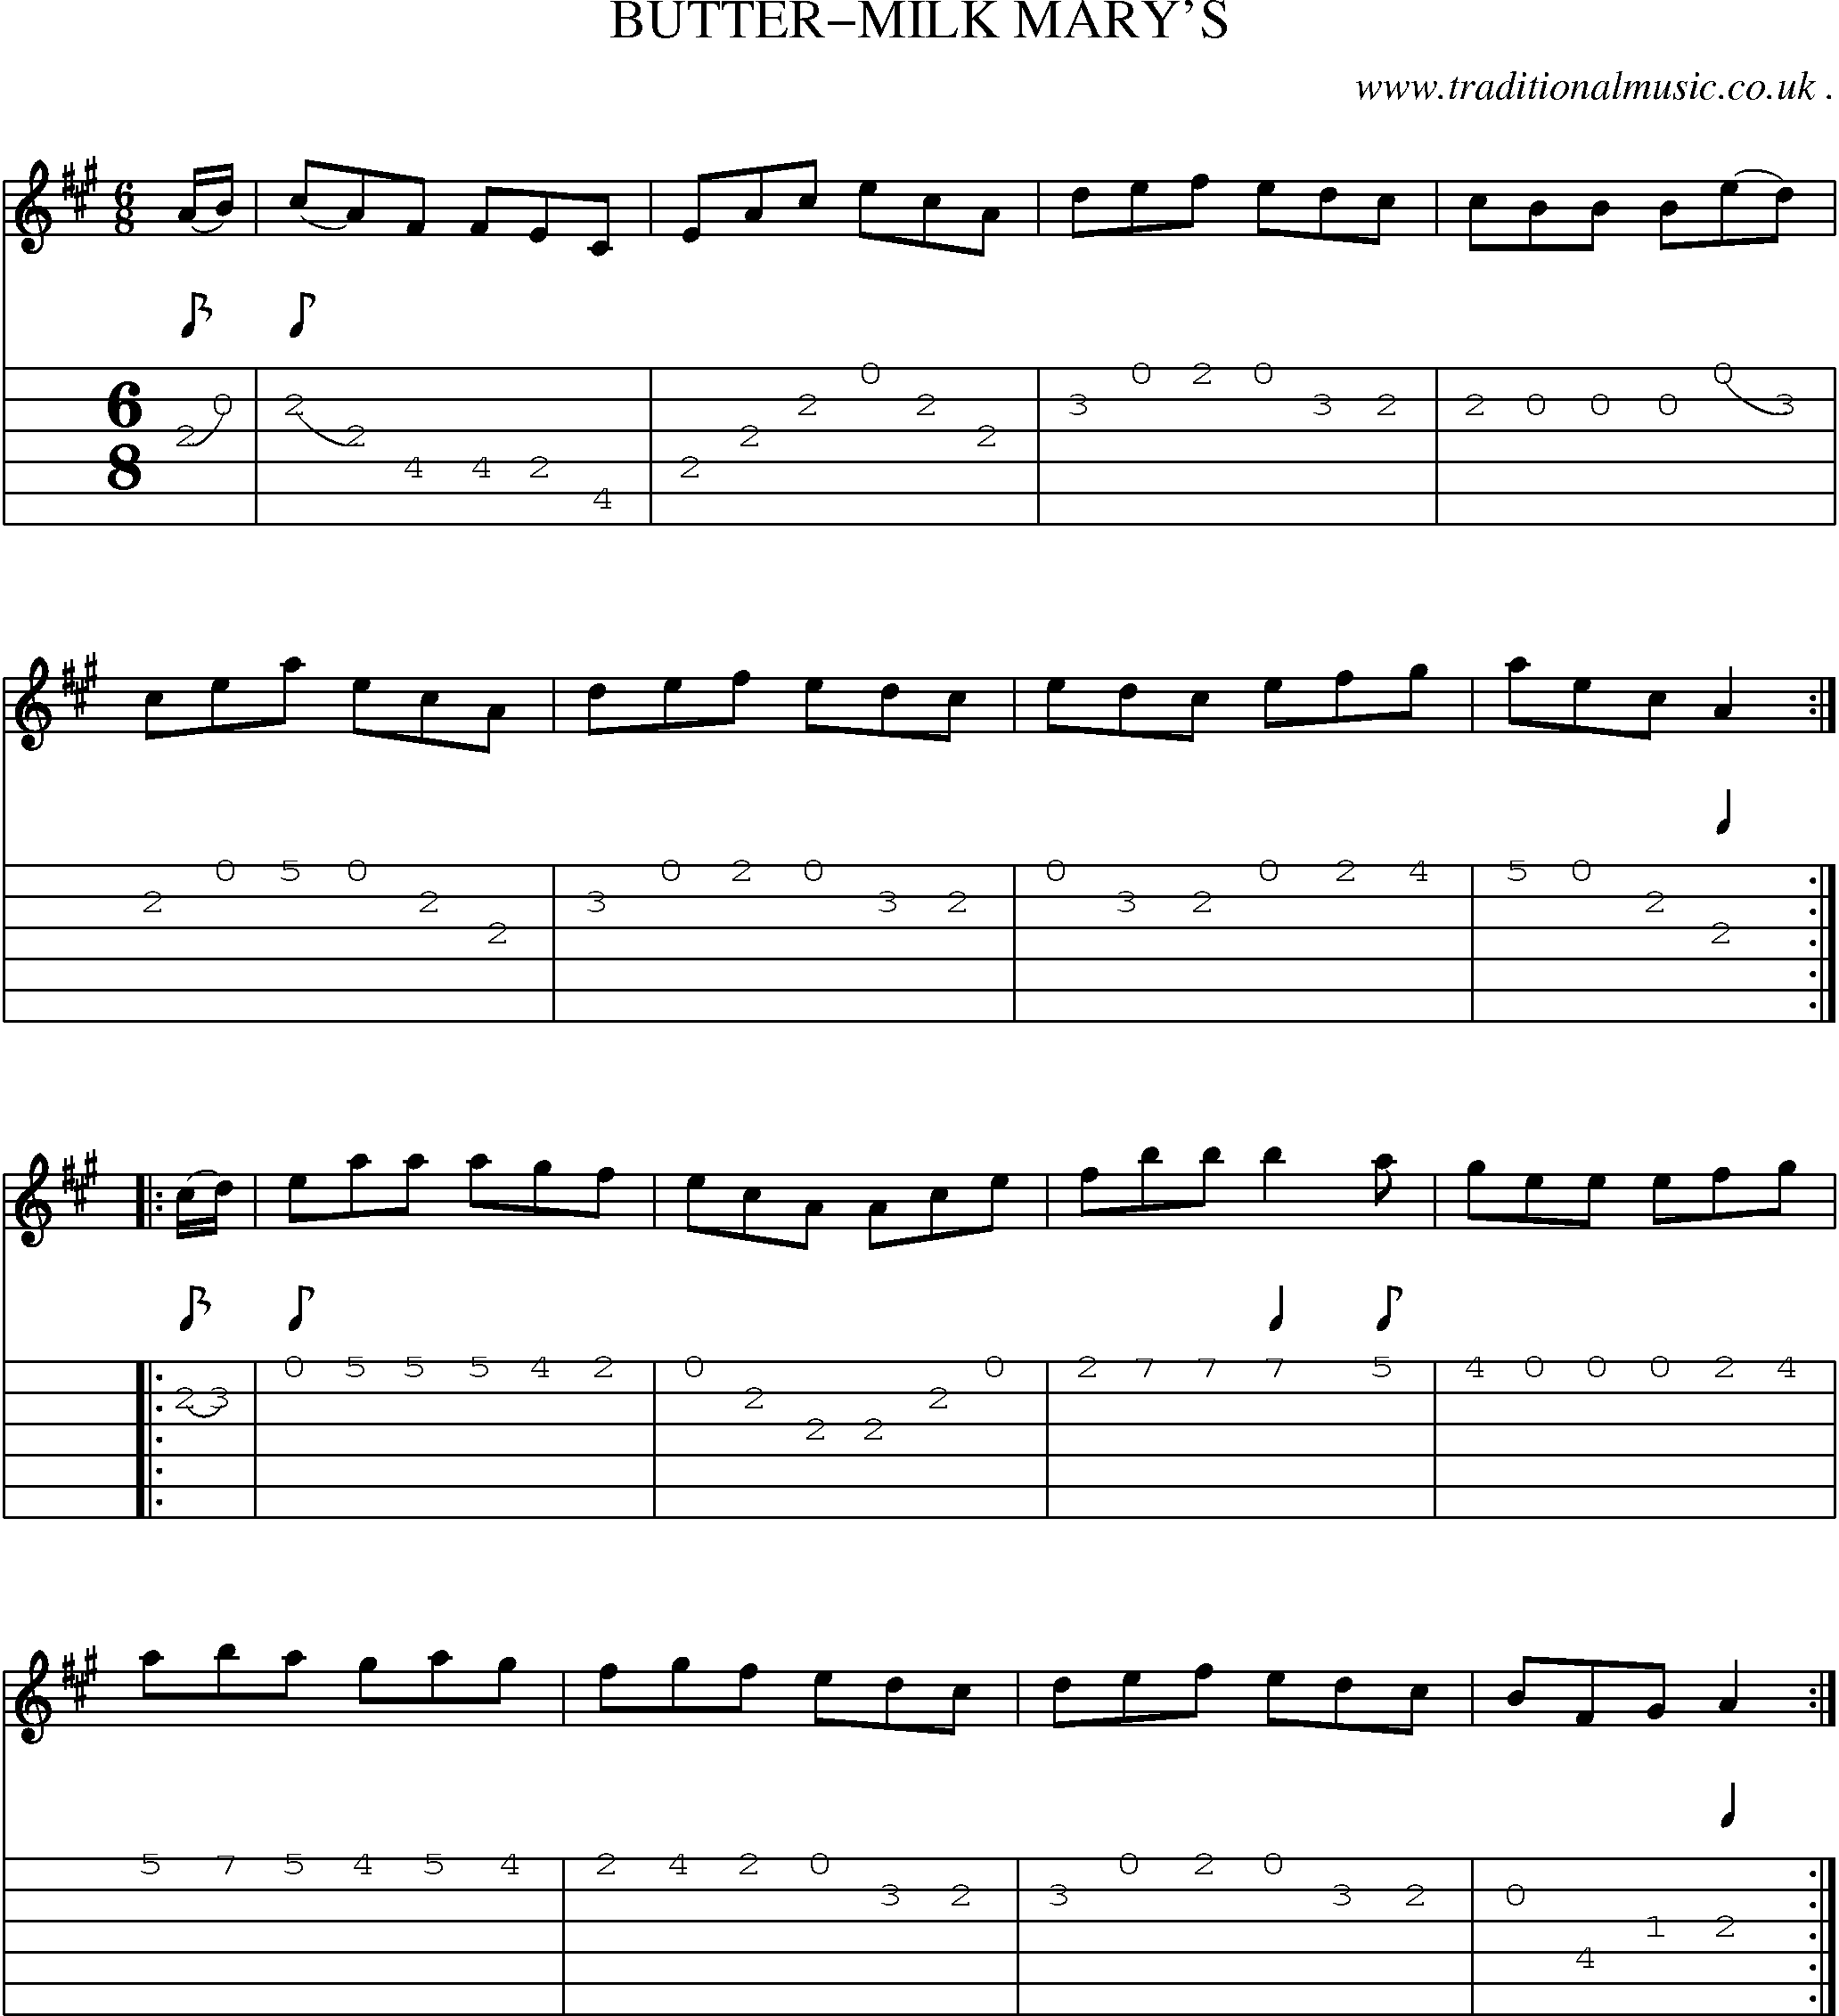 Sheet-Music and Guitar Tabs for Butter-milk Marys